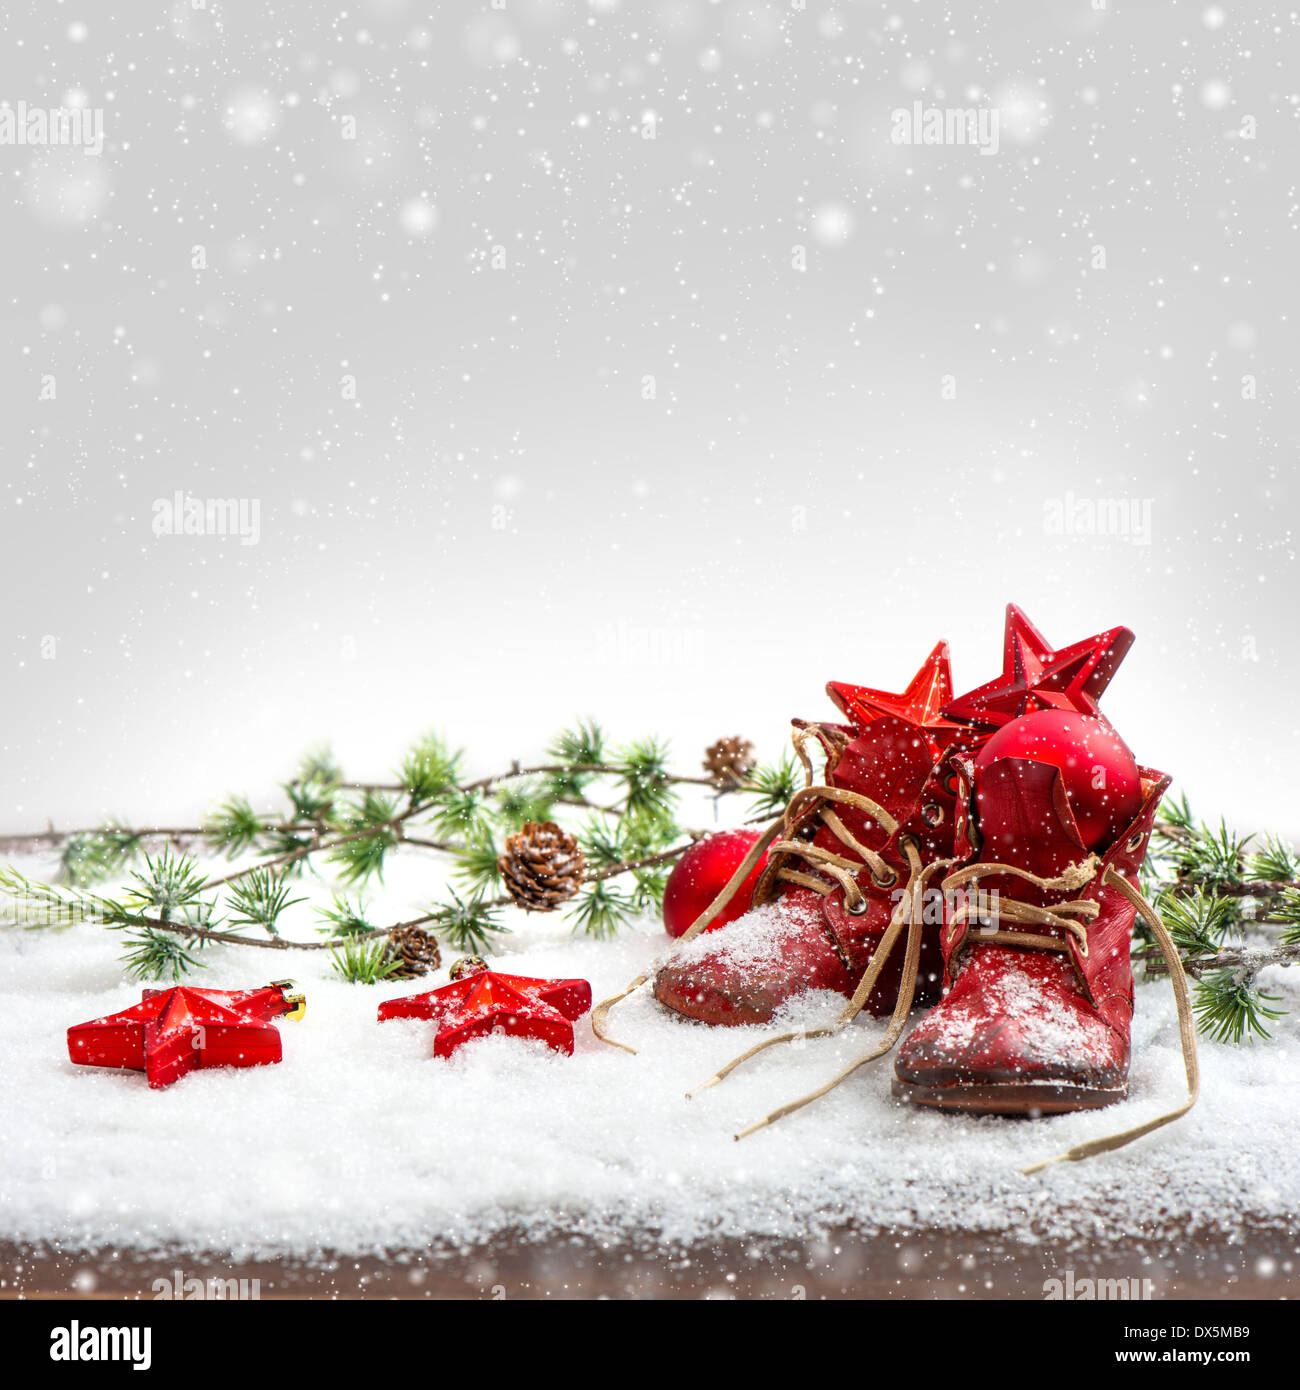 nostalgic christmas decoration with antique baby shoes. festive background. retro style picture with snow effect Stock Photo